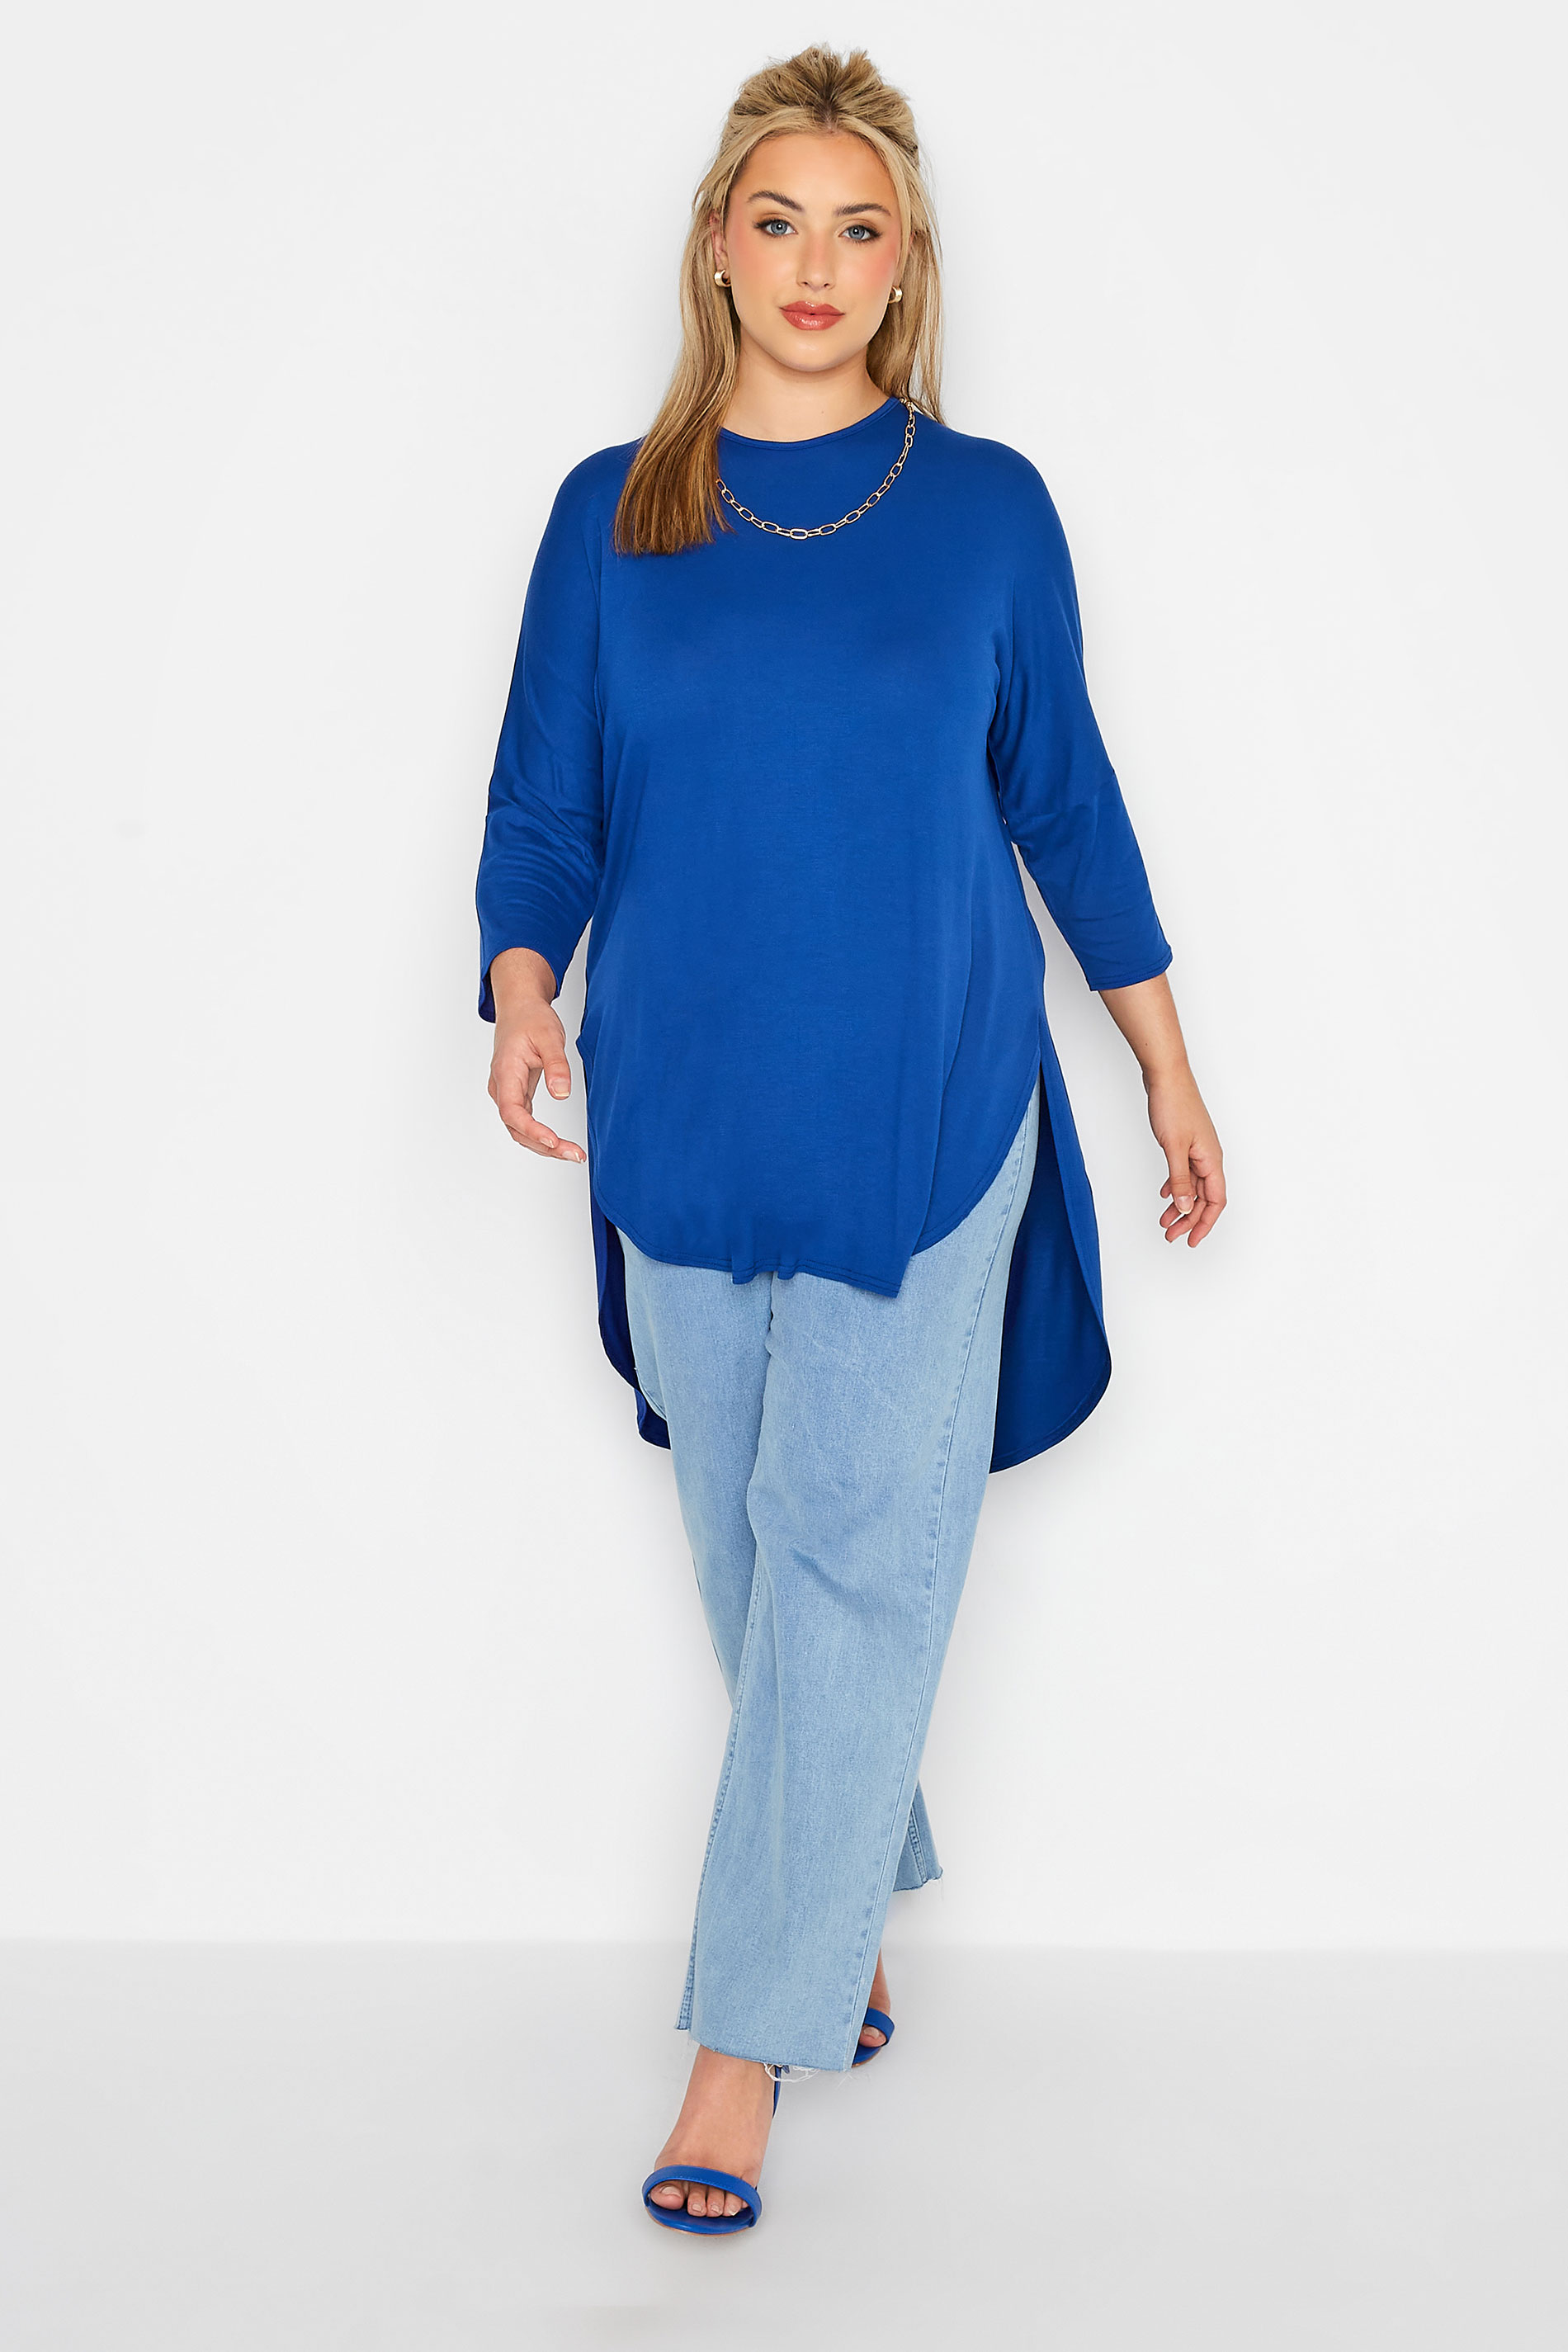 Grande taille  Tops Grande taille  Tops Ourlet Plongeant | LIMITED COLLECTION - T-Shirt Bleu Roi Manches Longues Ourlet Plongeant - IA53303